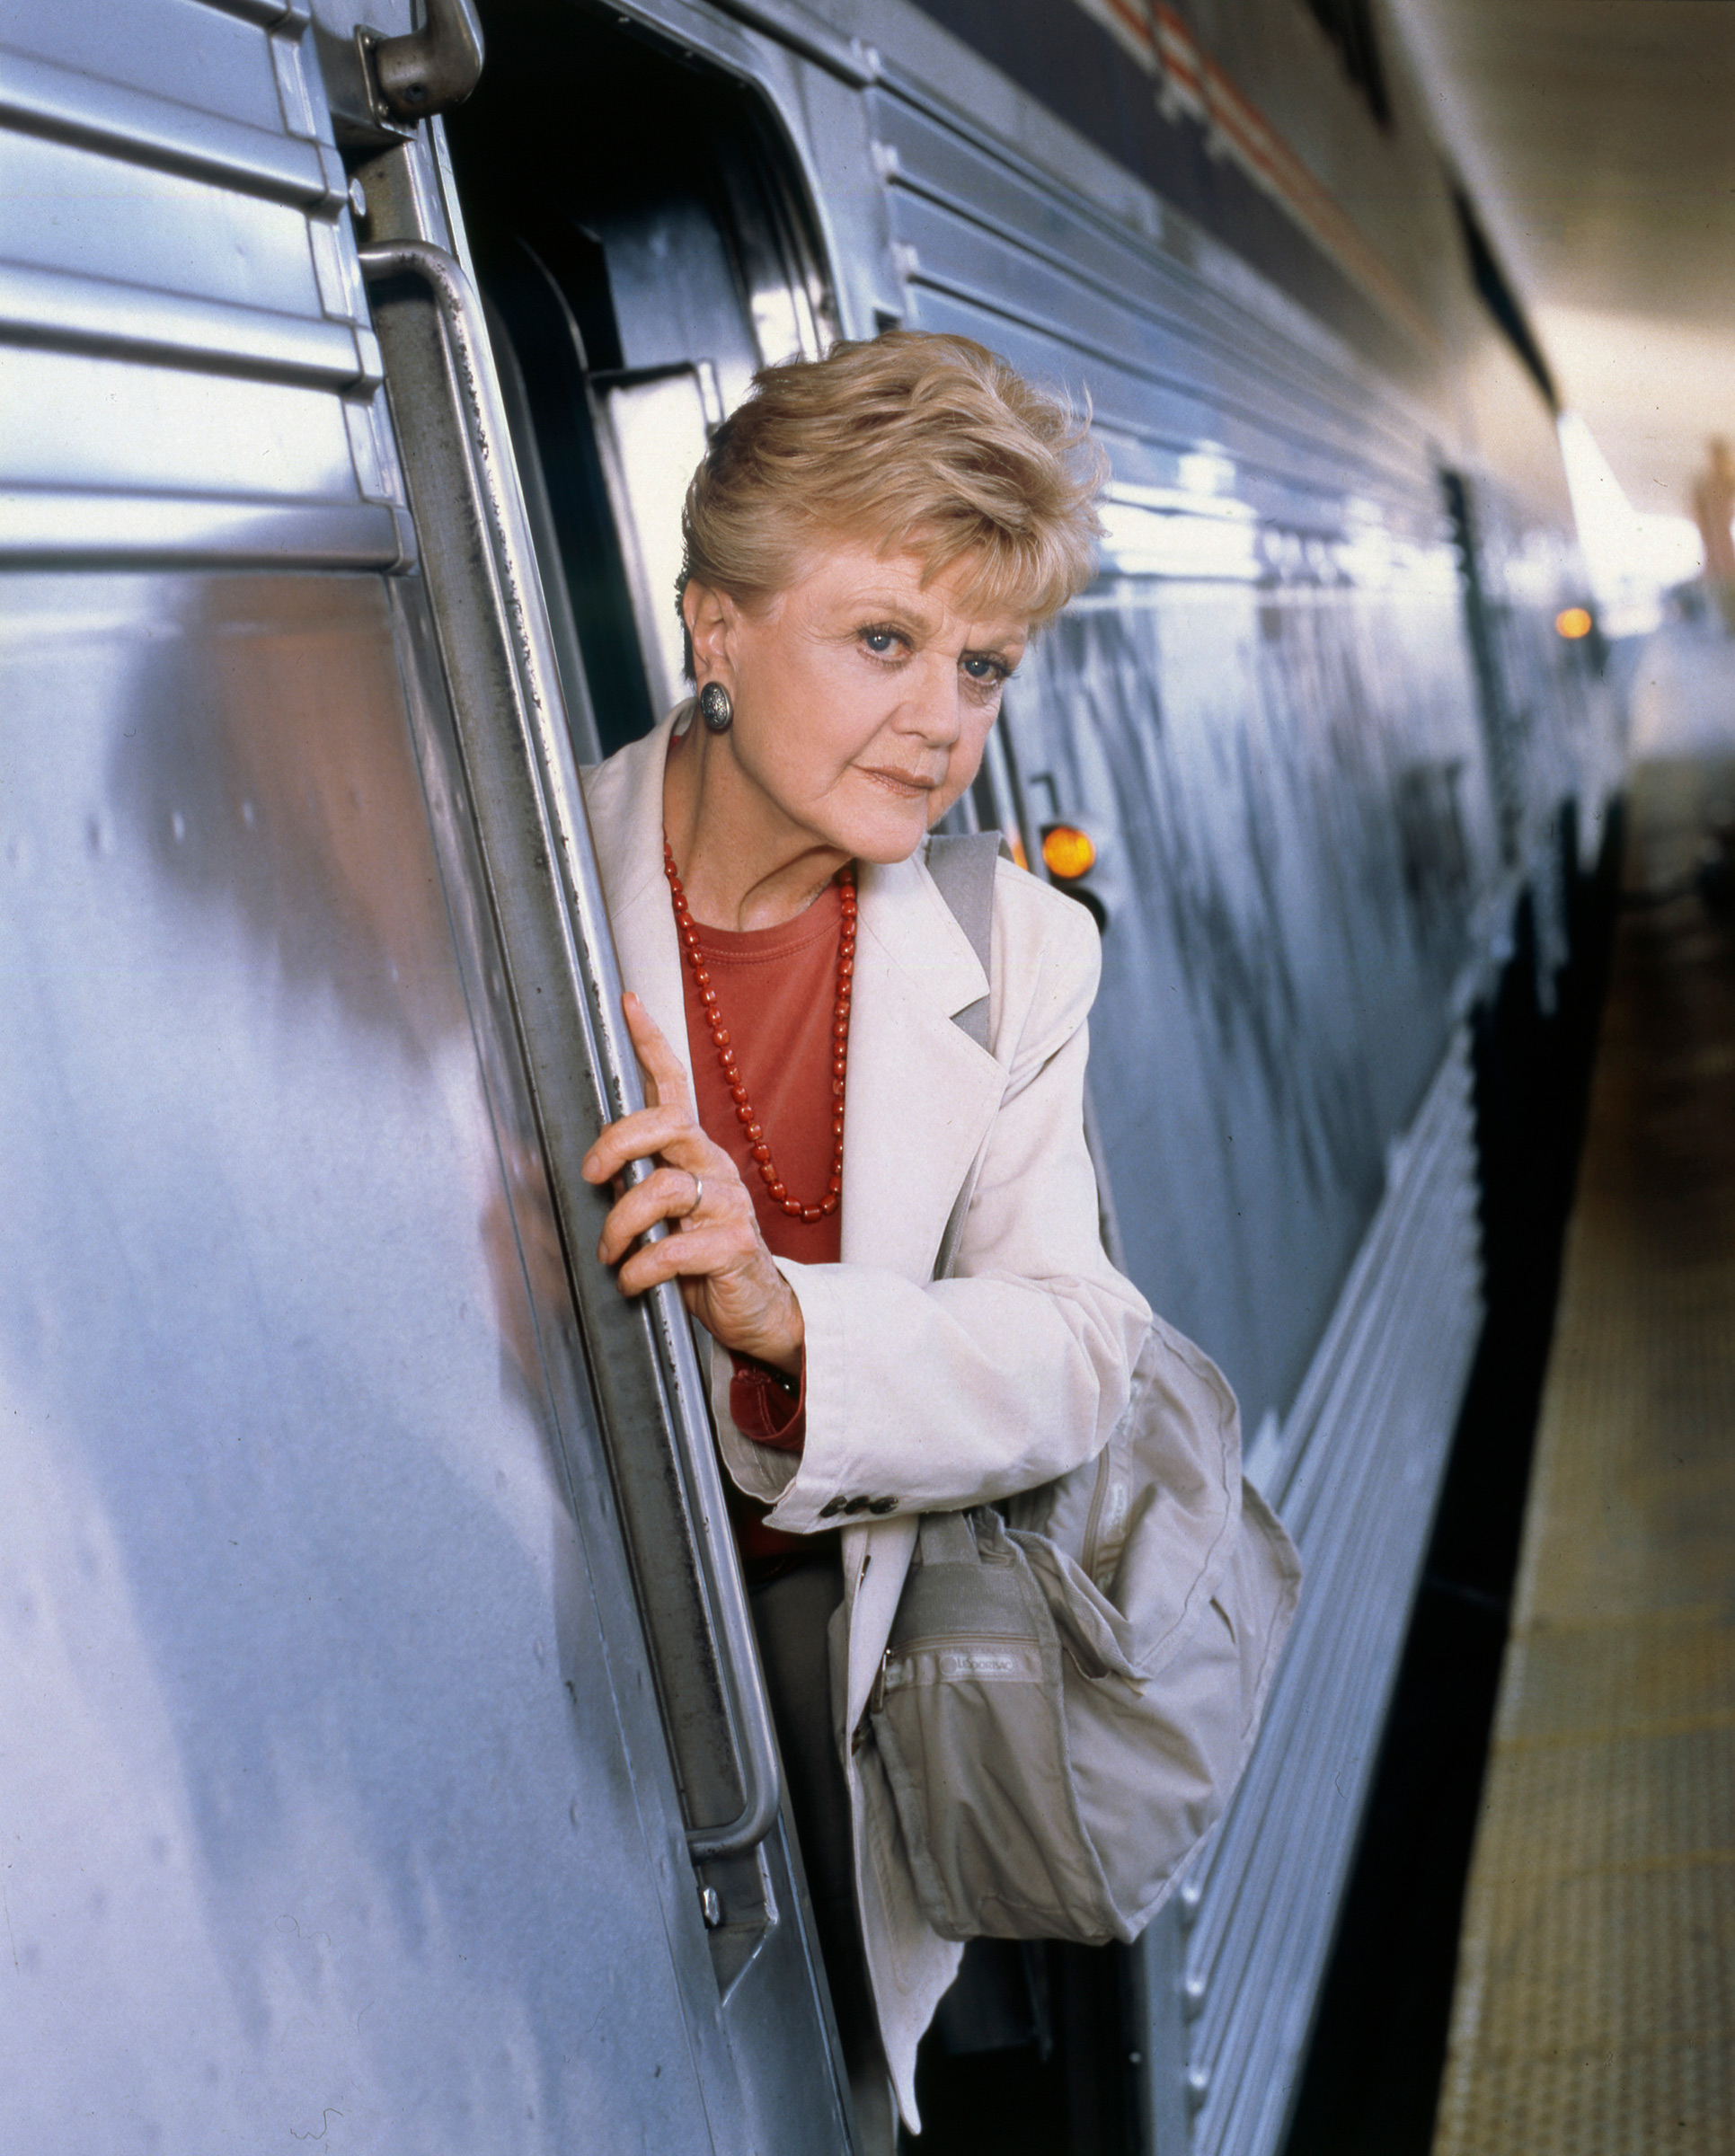 Angela Lansbury as Jessica Fletcher in "Murder, She Wrote: South by Southwest" in 1997.